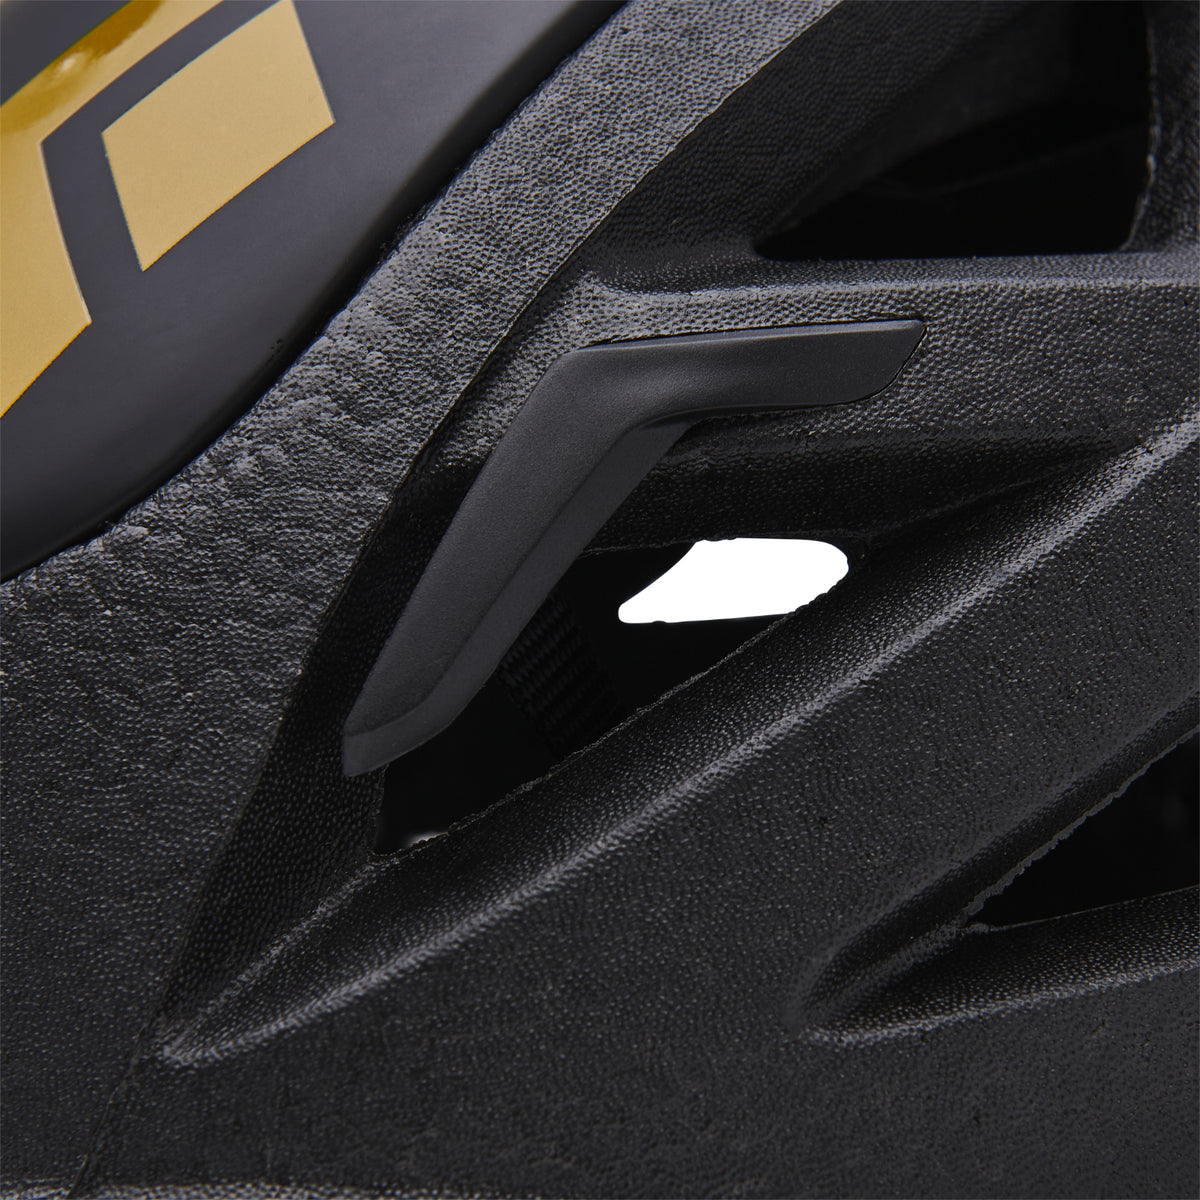 Black Diamond Vapor helmet in black with a gold logo close up of head torch attachment